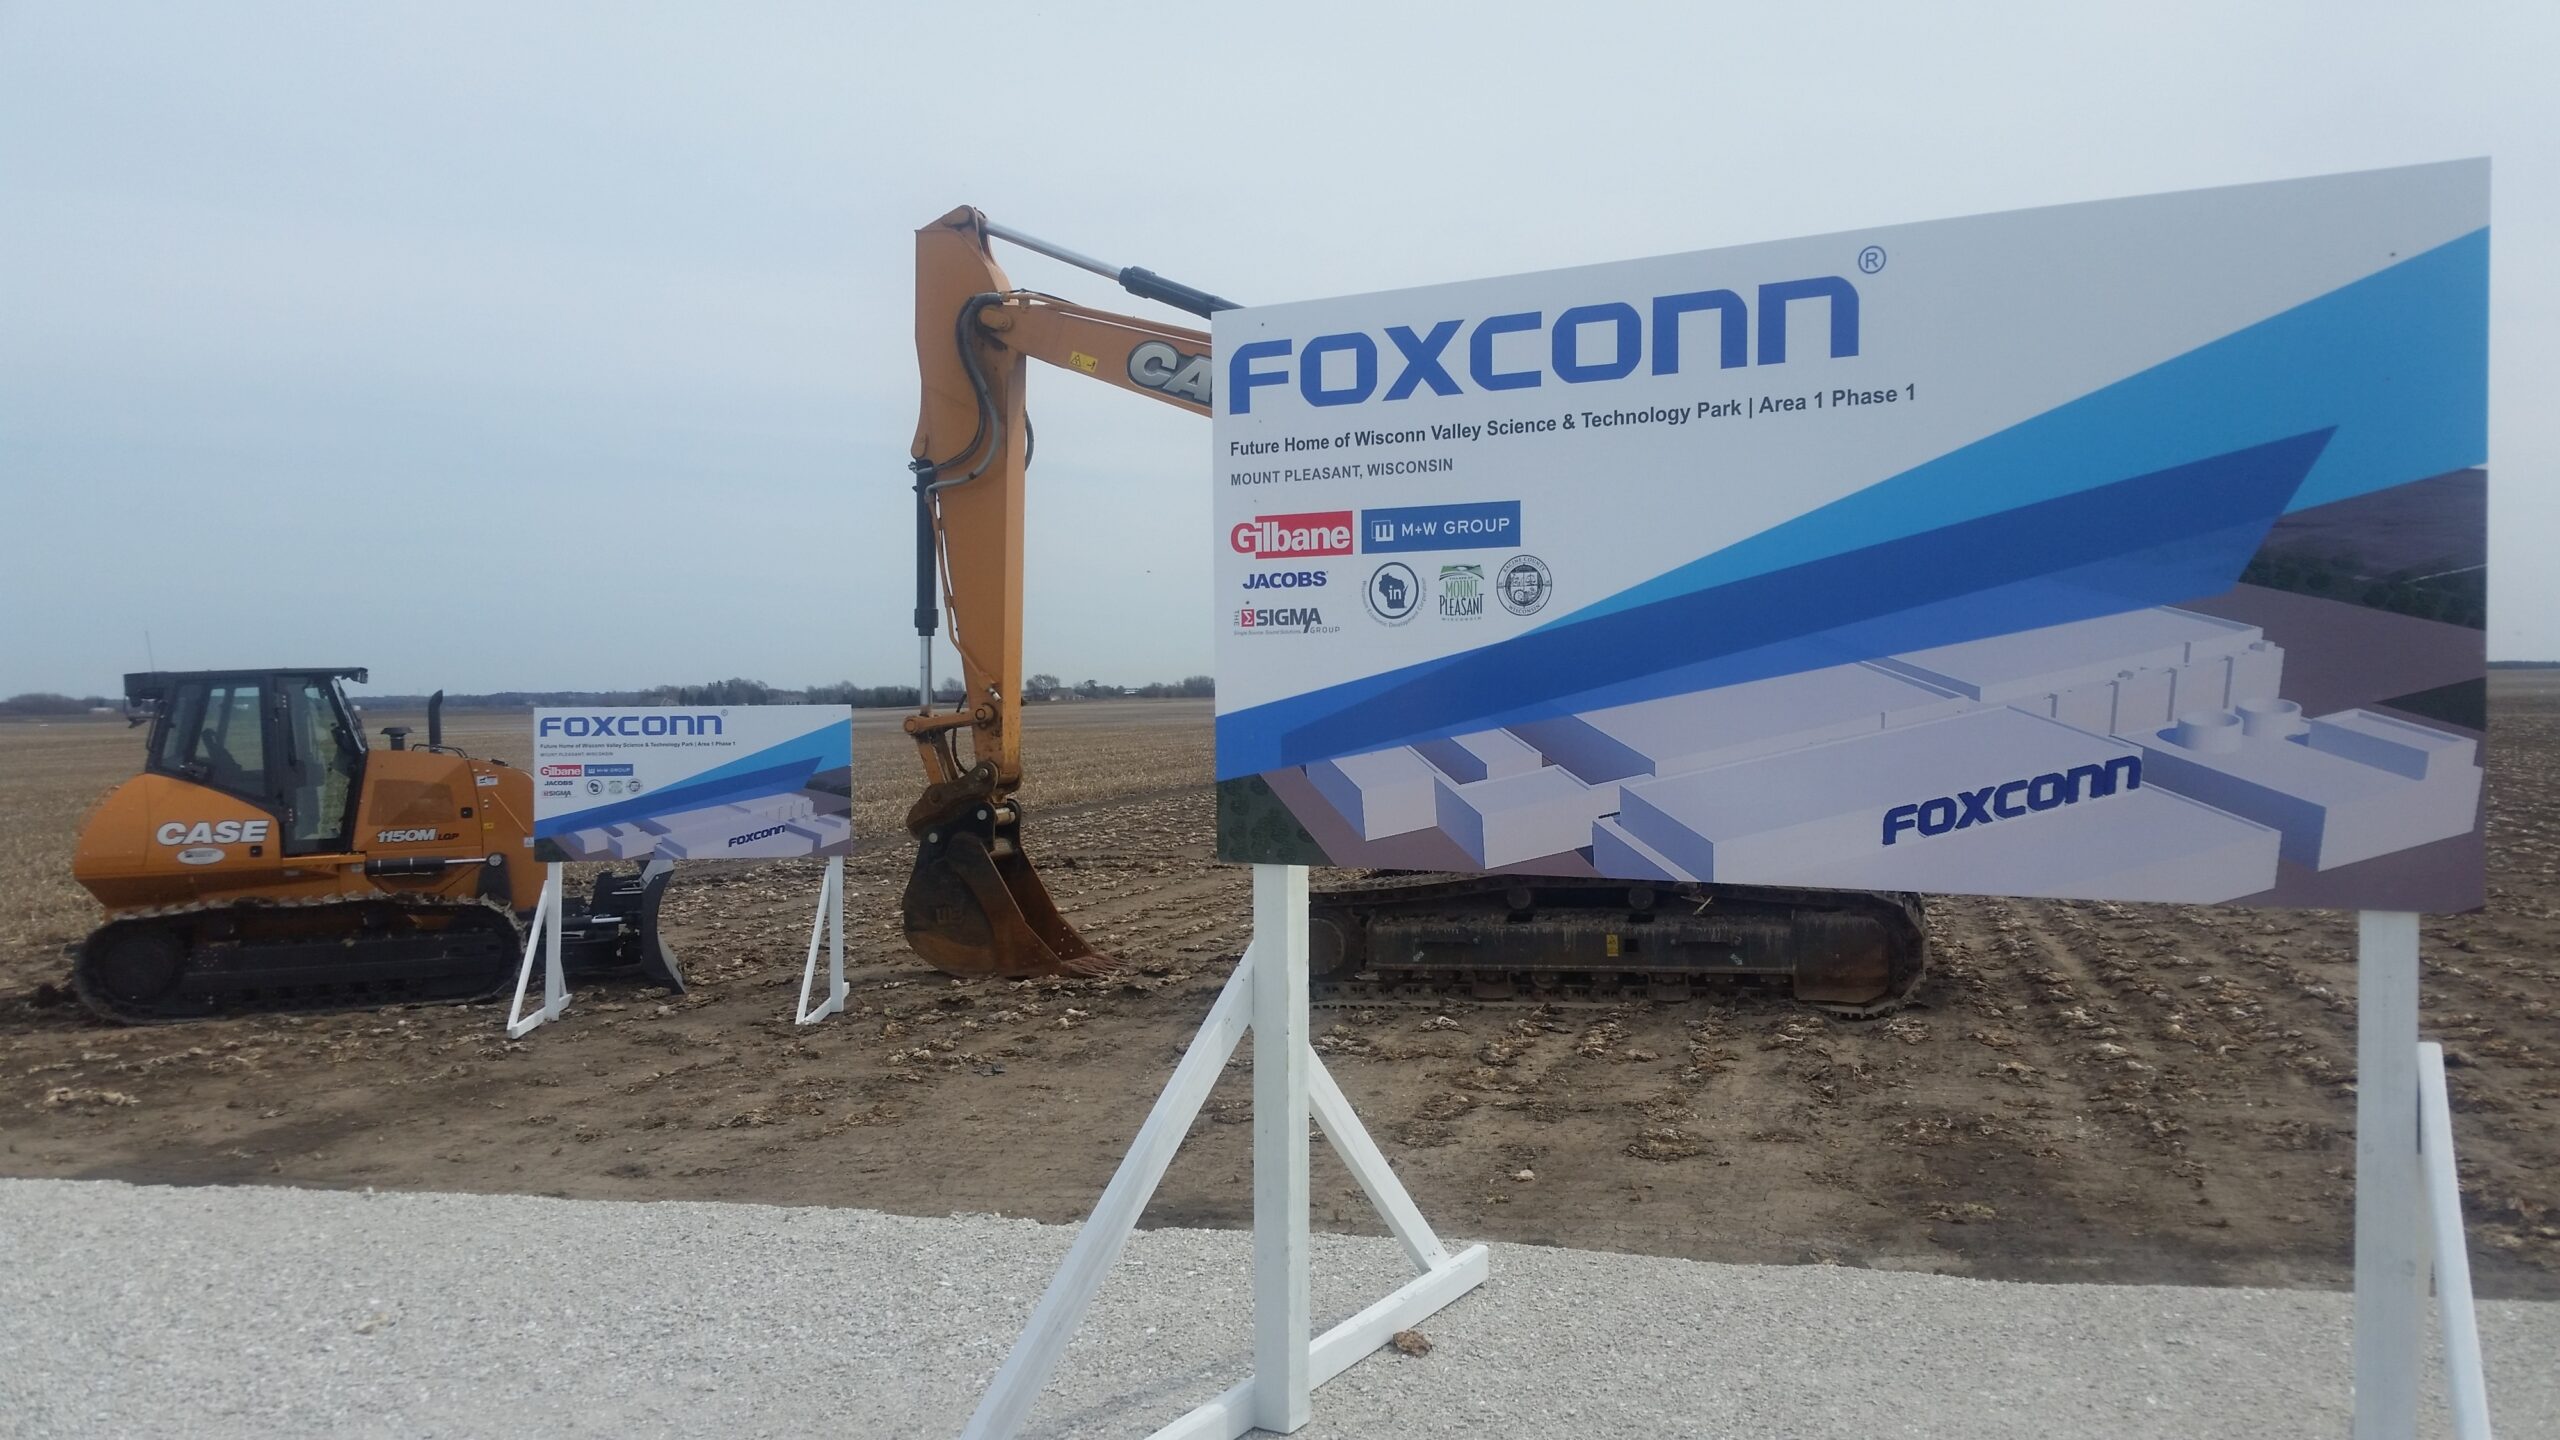 Equipment at the Foxconn construction site